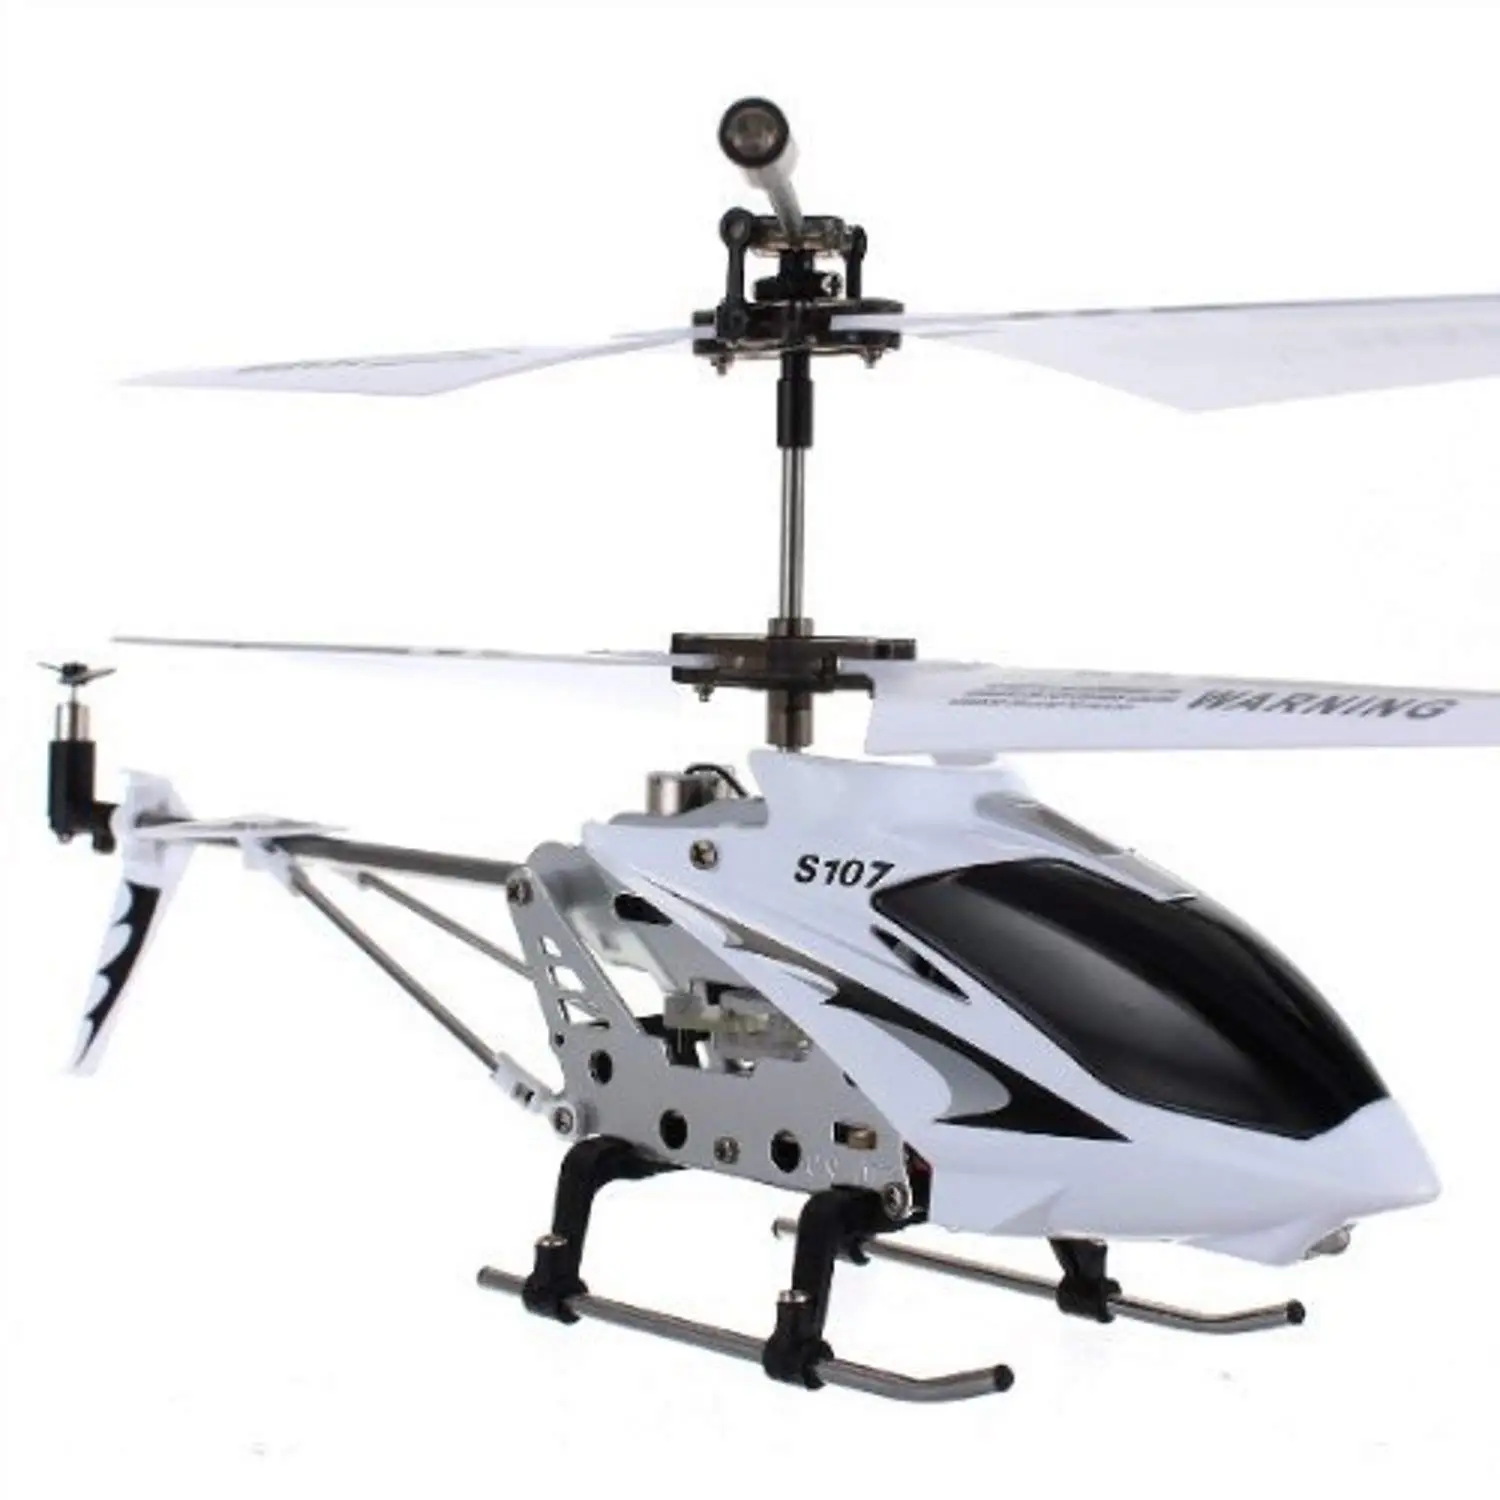 s107 helicopter remote